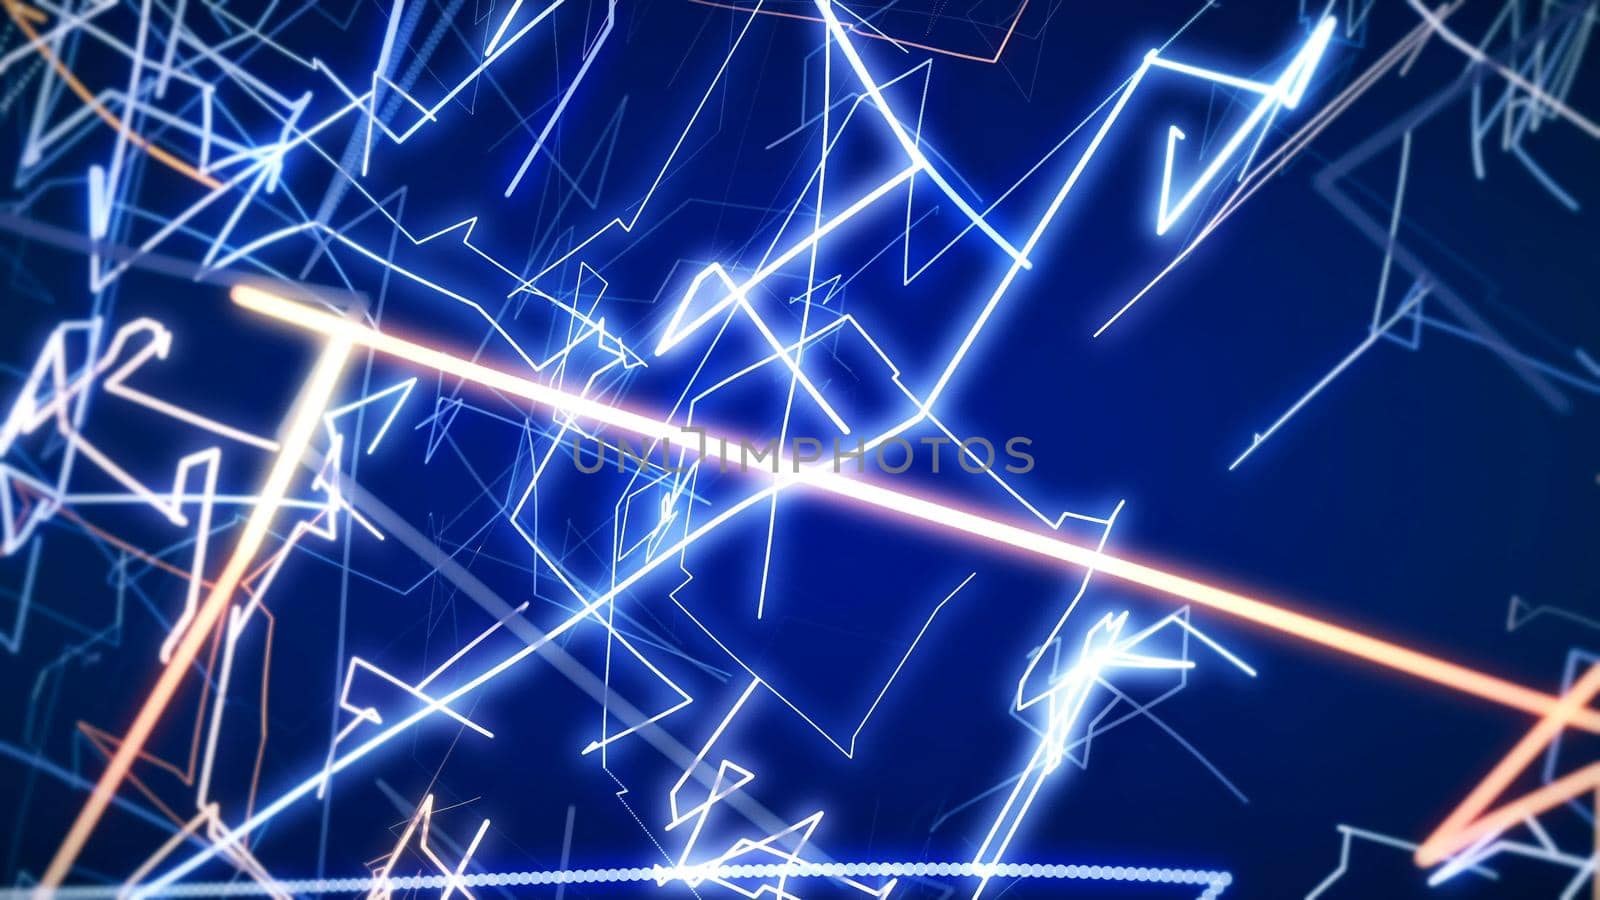 CGI motion graphics with sci-fi fantasy and neon lines 3D rendering by designprojects